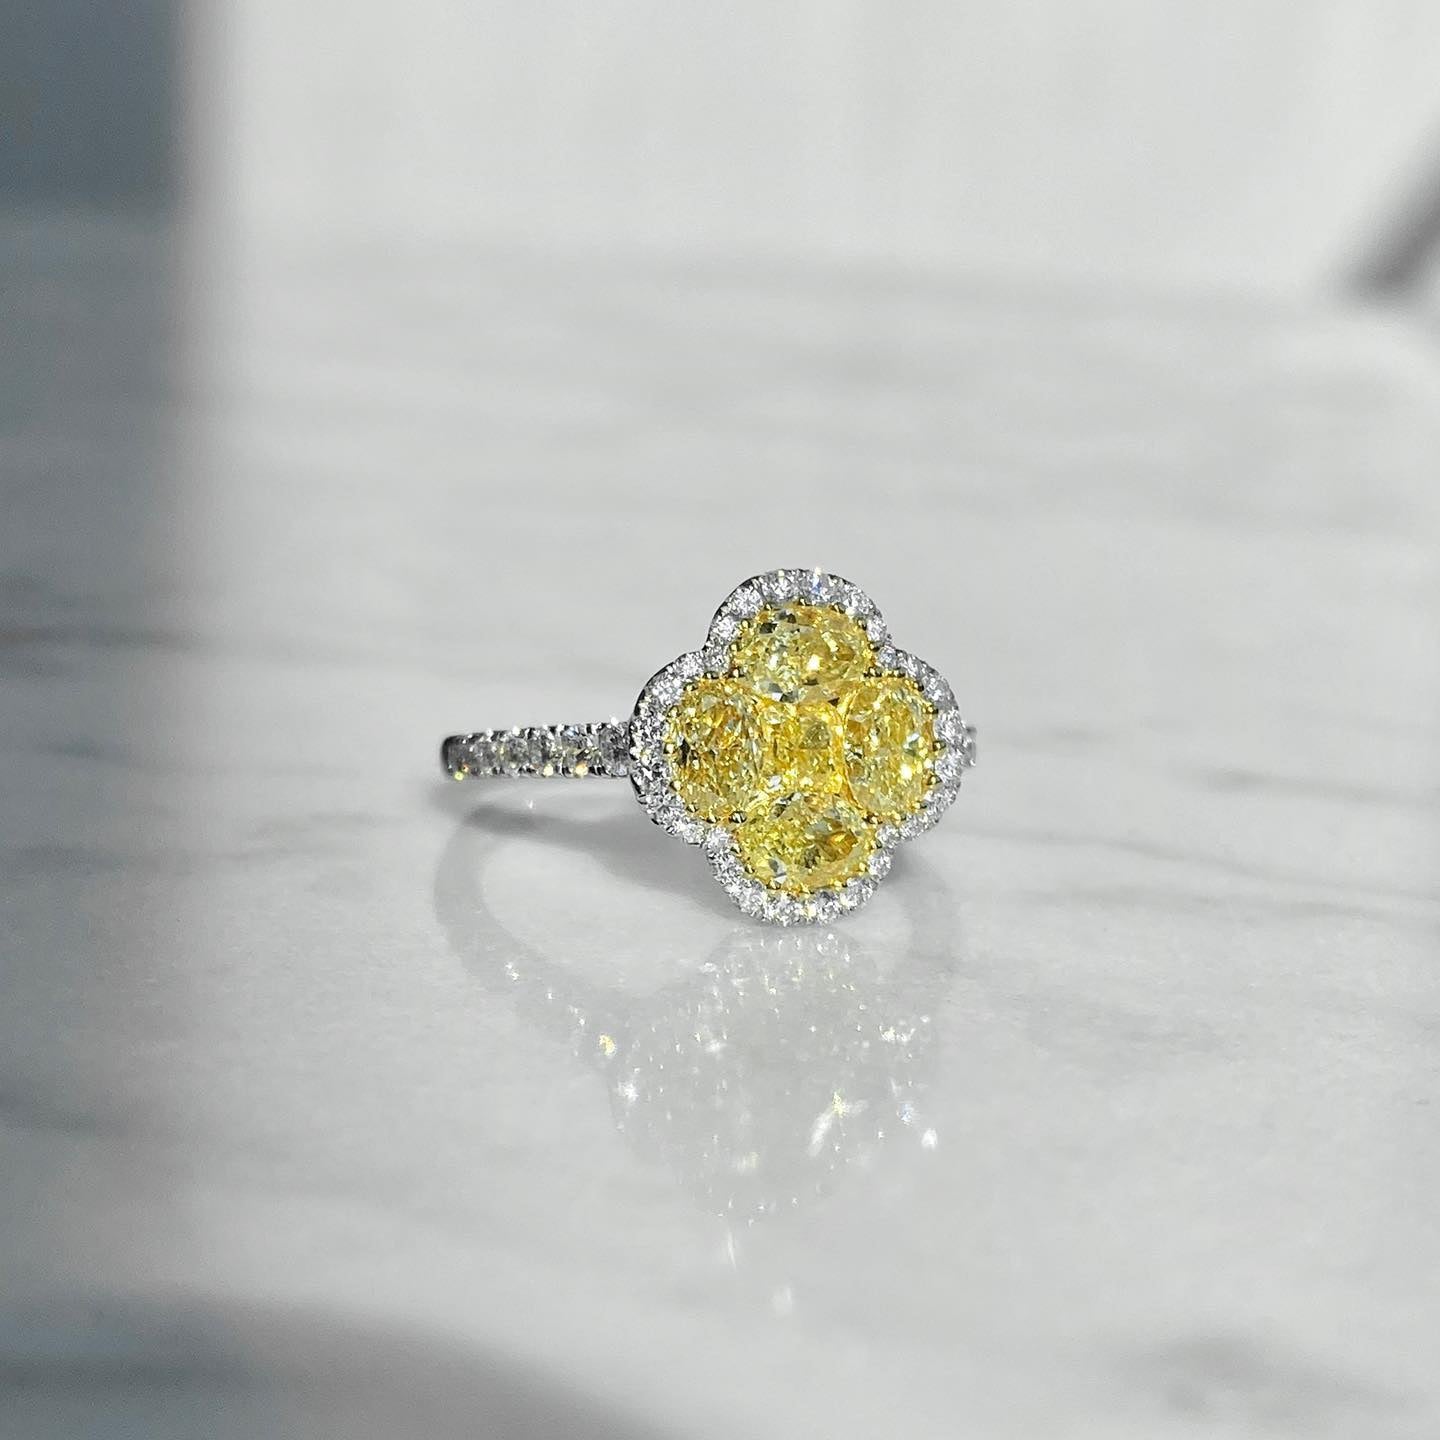 18K White and Yellow Gold Fancy Yellow Diamond "Clover" Ring